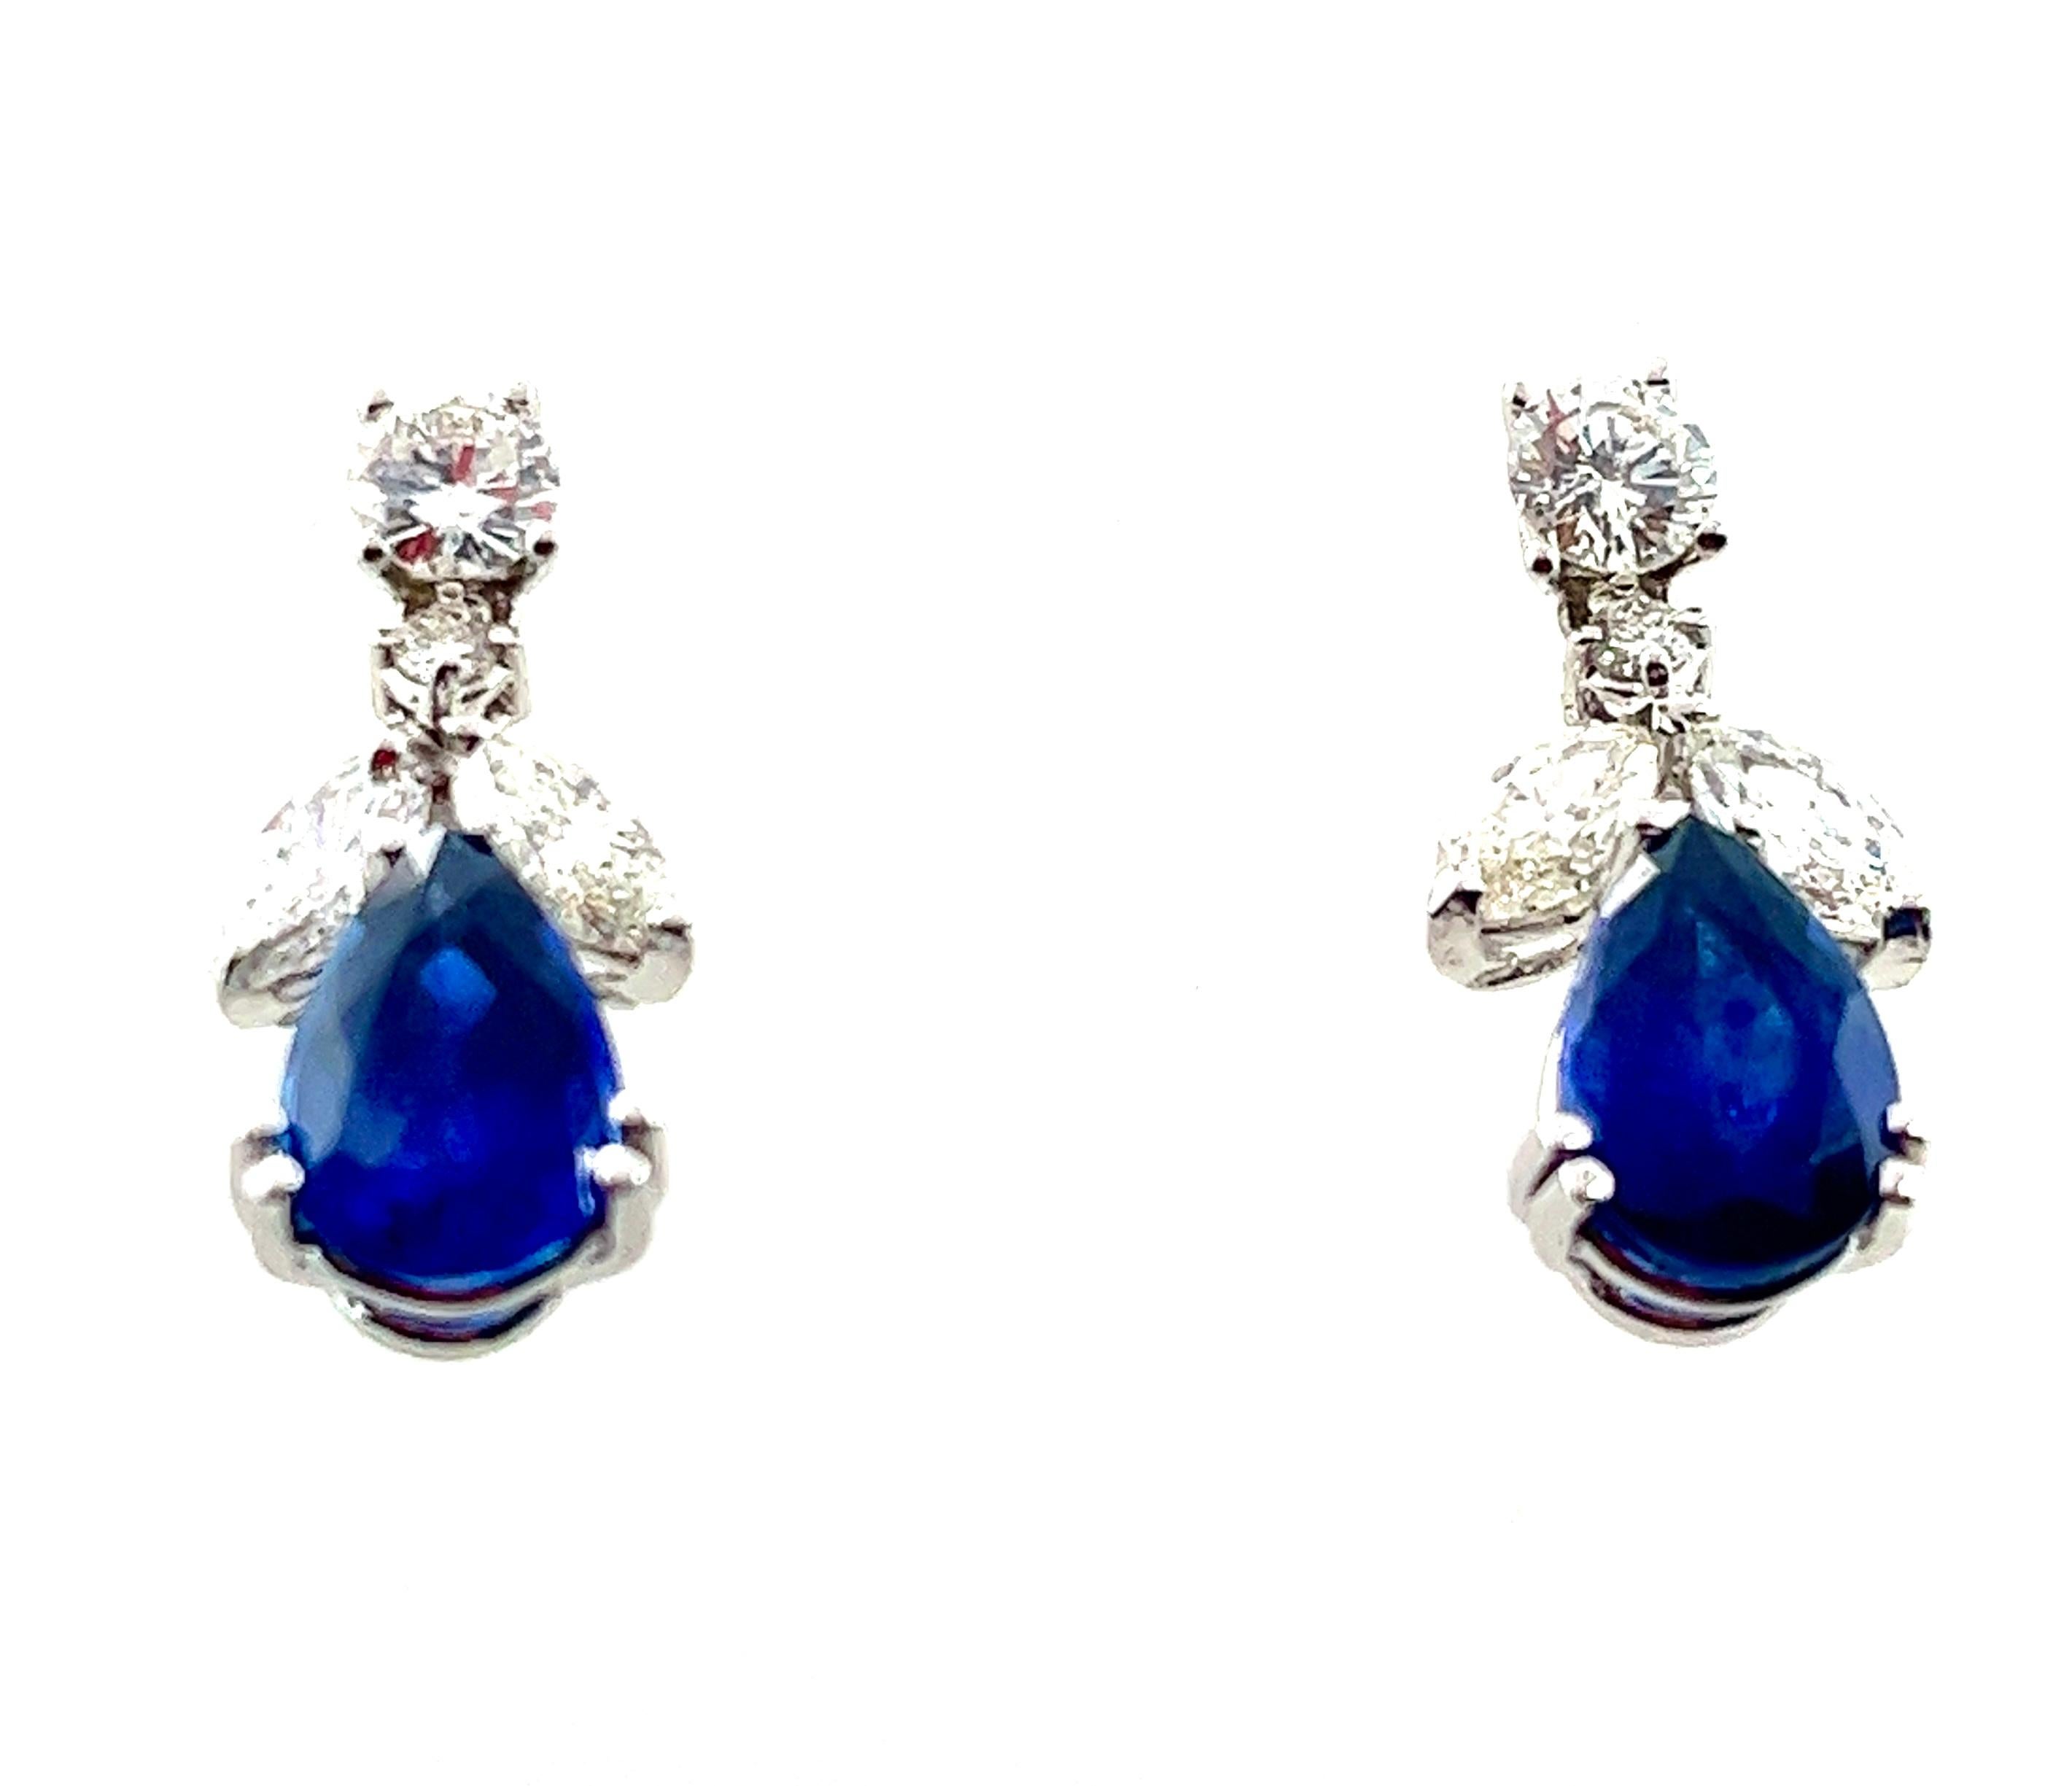 Introducing the Epitome of Elegance: Pear-Shaped Sapphires & Diamonds Earrings

Behold a masterpiece that will make your heart skip a beat! These exquisite earrings feature a dazzling duo of natural earth-mined sapphires, pear-shaped and totaling a